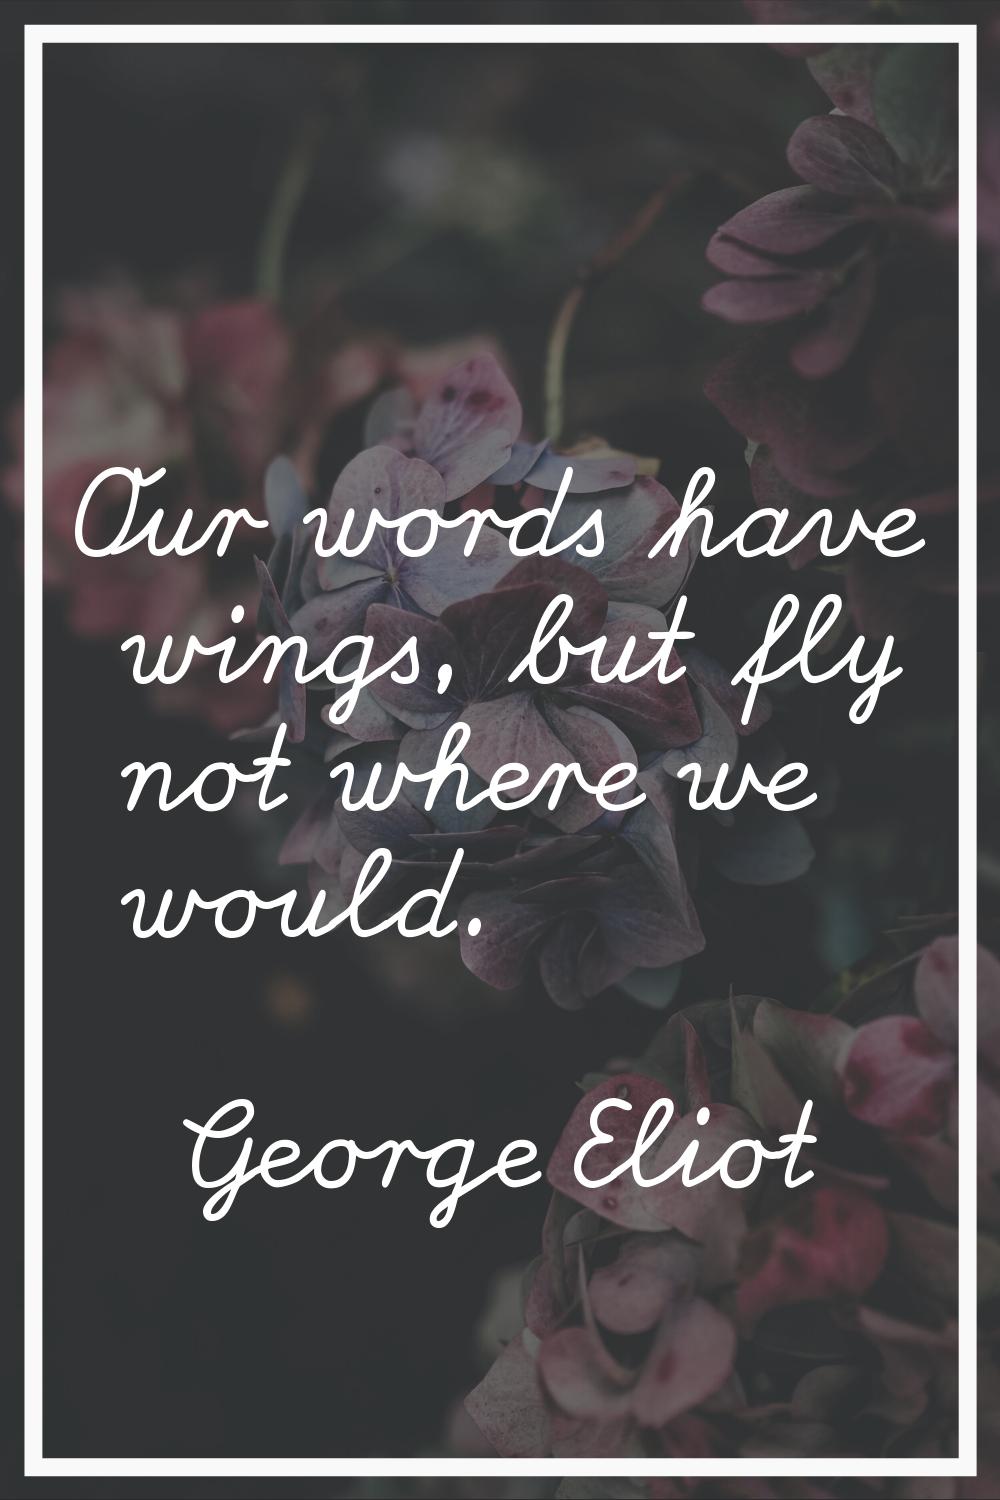 Our words have wings, but fly not where we would.